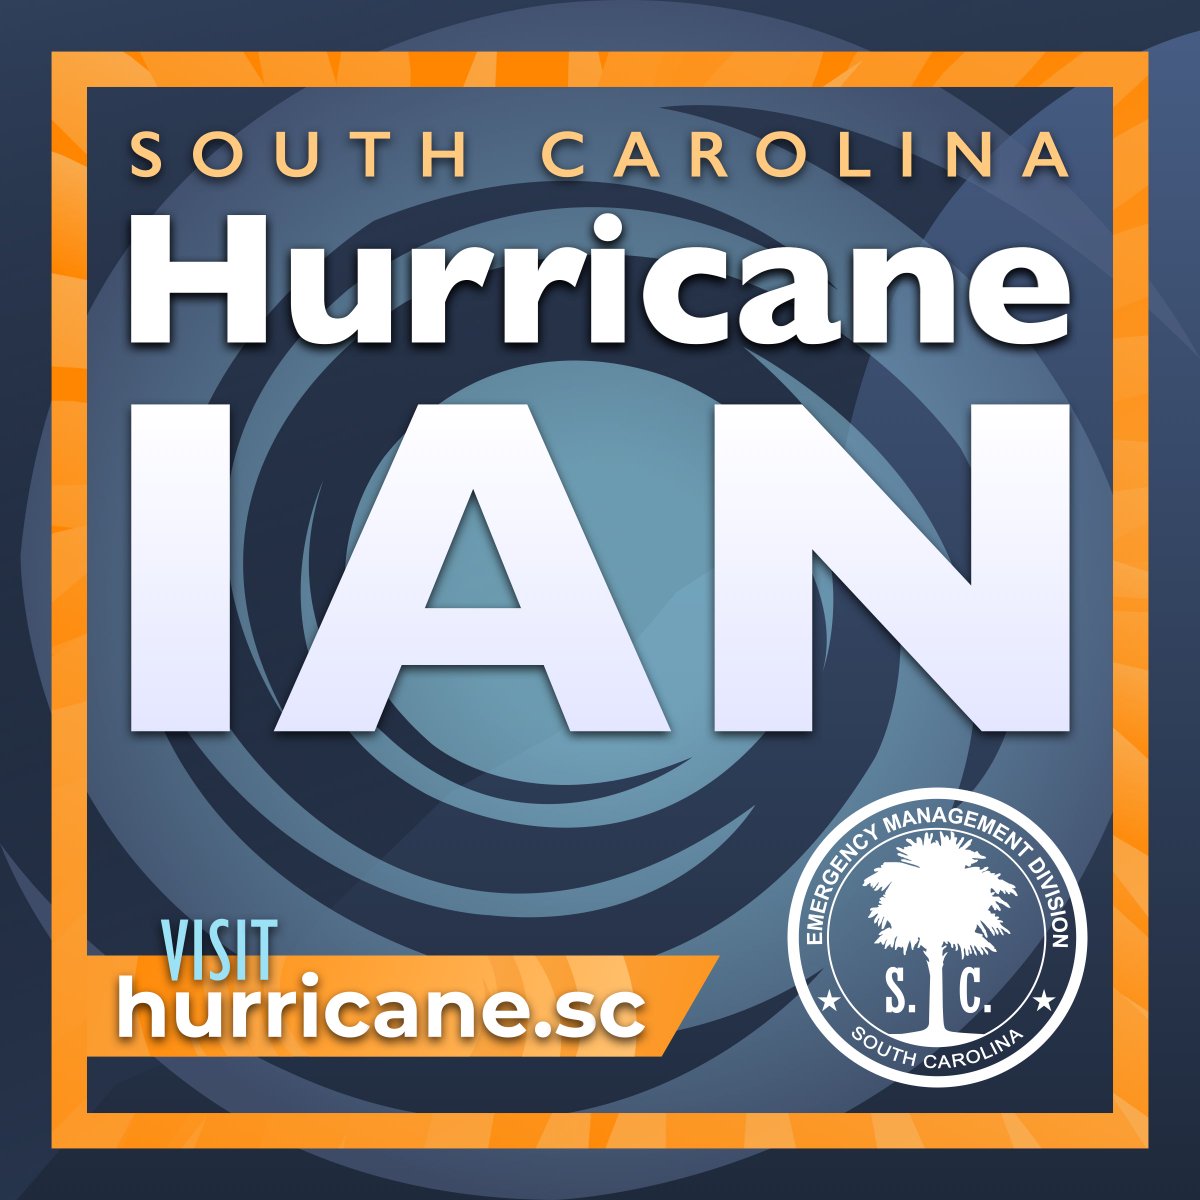 Be aware of potential flash flooding and storm surge today. If there’s any possibility of a flash flood, move to higher ground. Do not wait to be told to move. #Hurricanelan #scwx #chwx #sctweets hurricane.sc/prepare